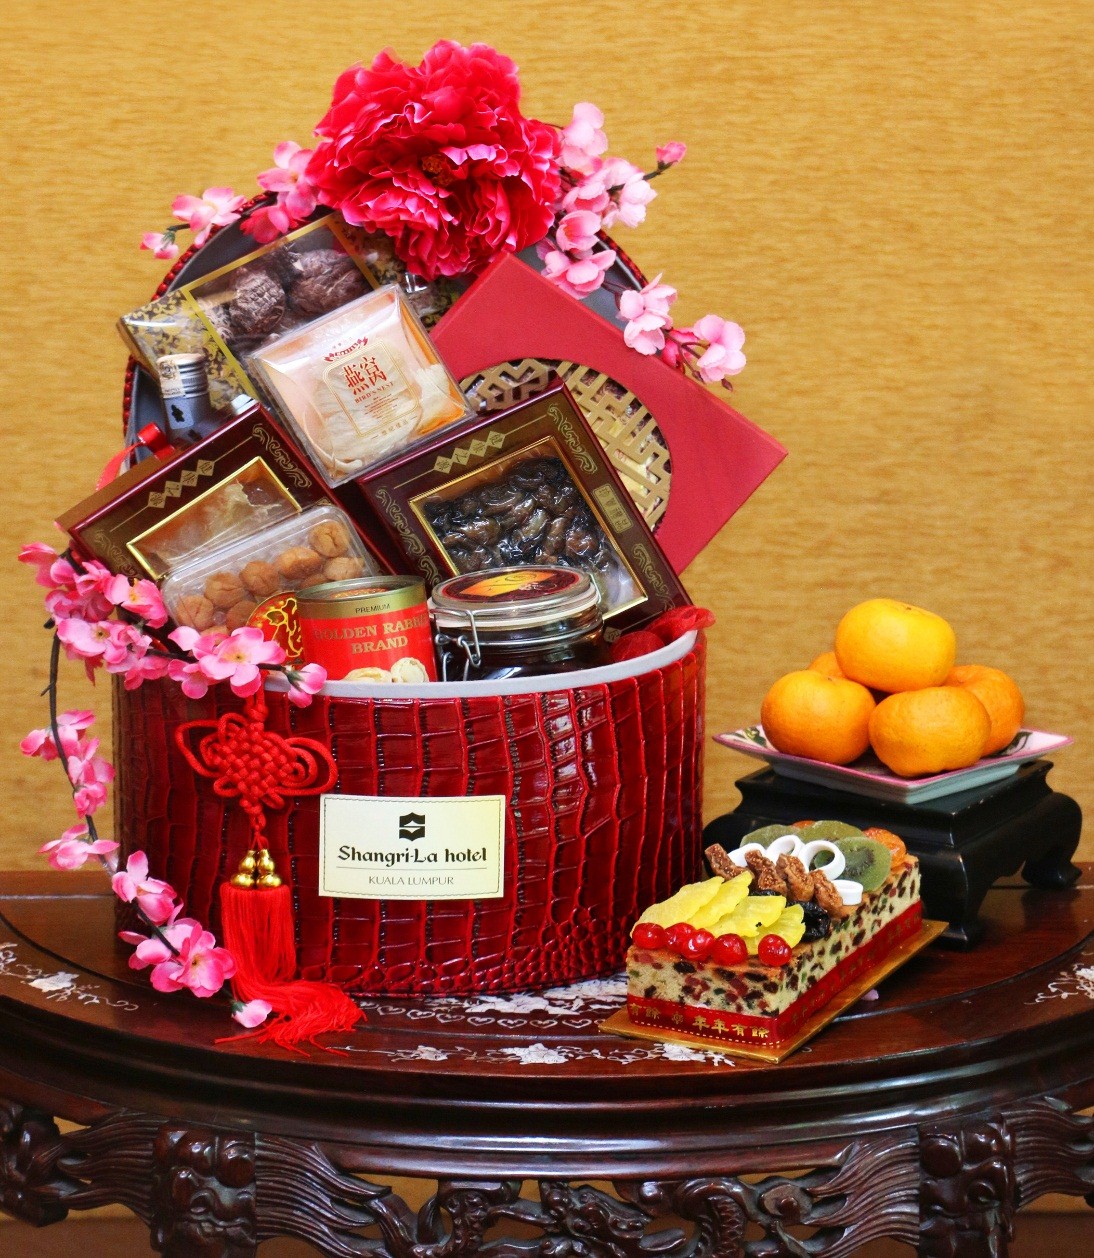 LUXURIOUS HAMPERS AND NINKO BY SHANGRI-LA HOTEL, KUALA LUMPUR FOR CHINESE NEW YEAR